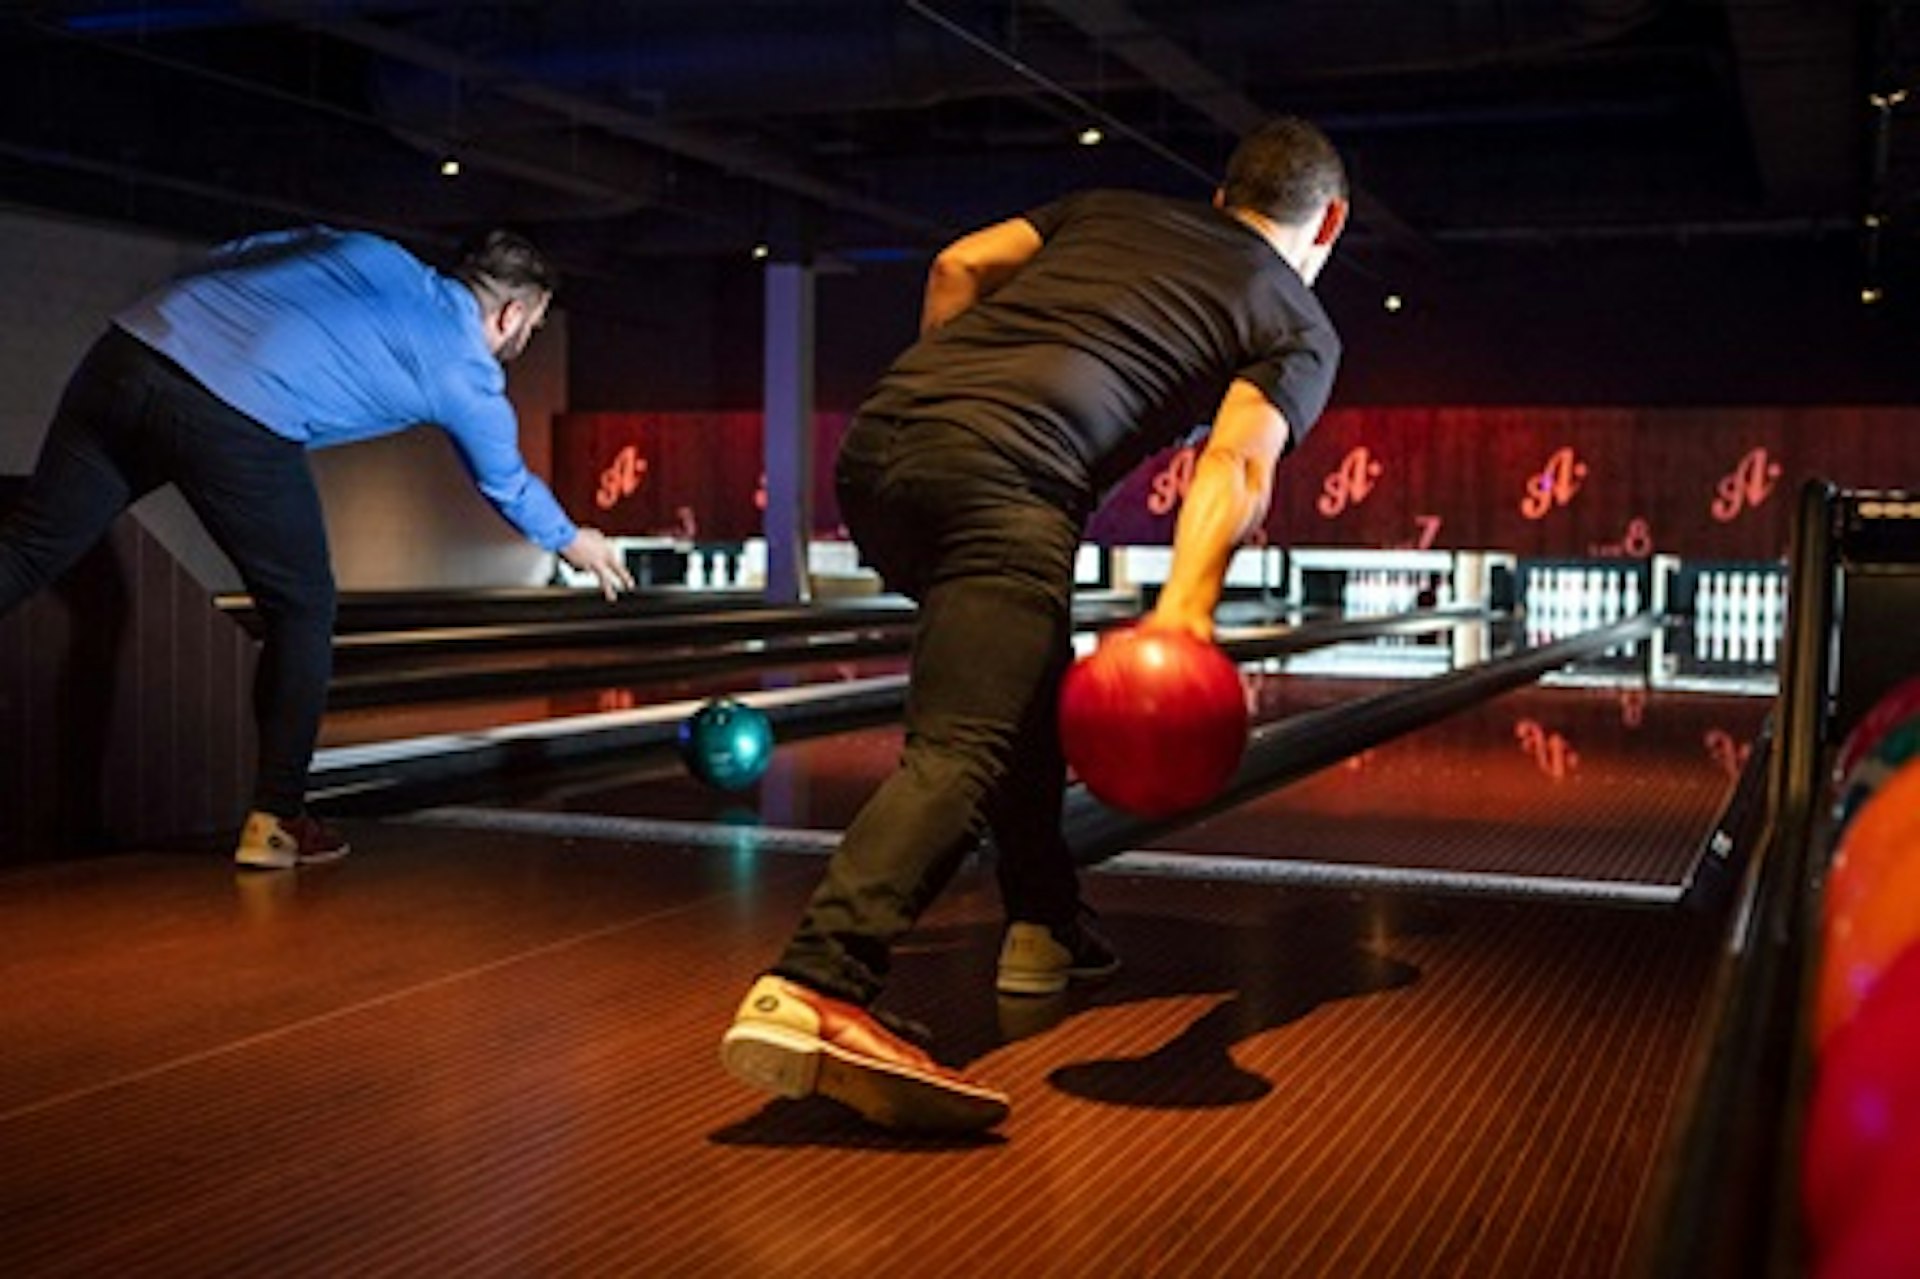 Drink, Dine and Boutique Bowling for Two at All Star Lanes 1